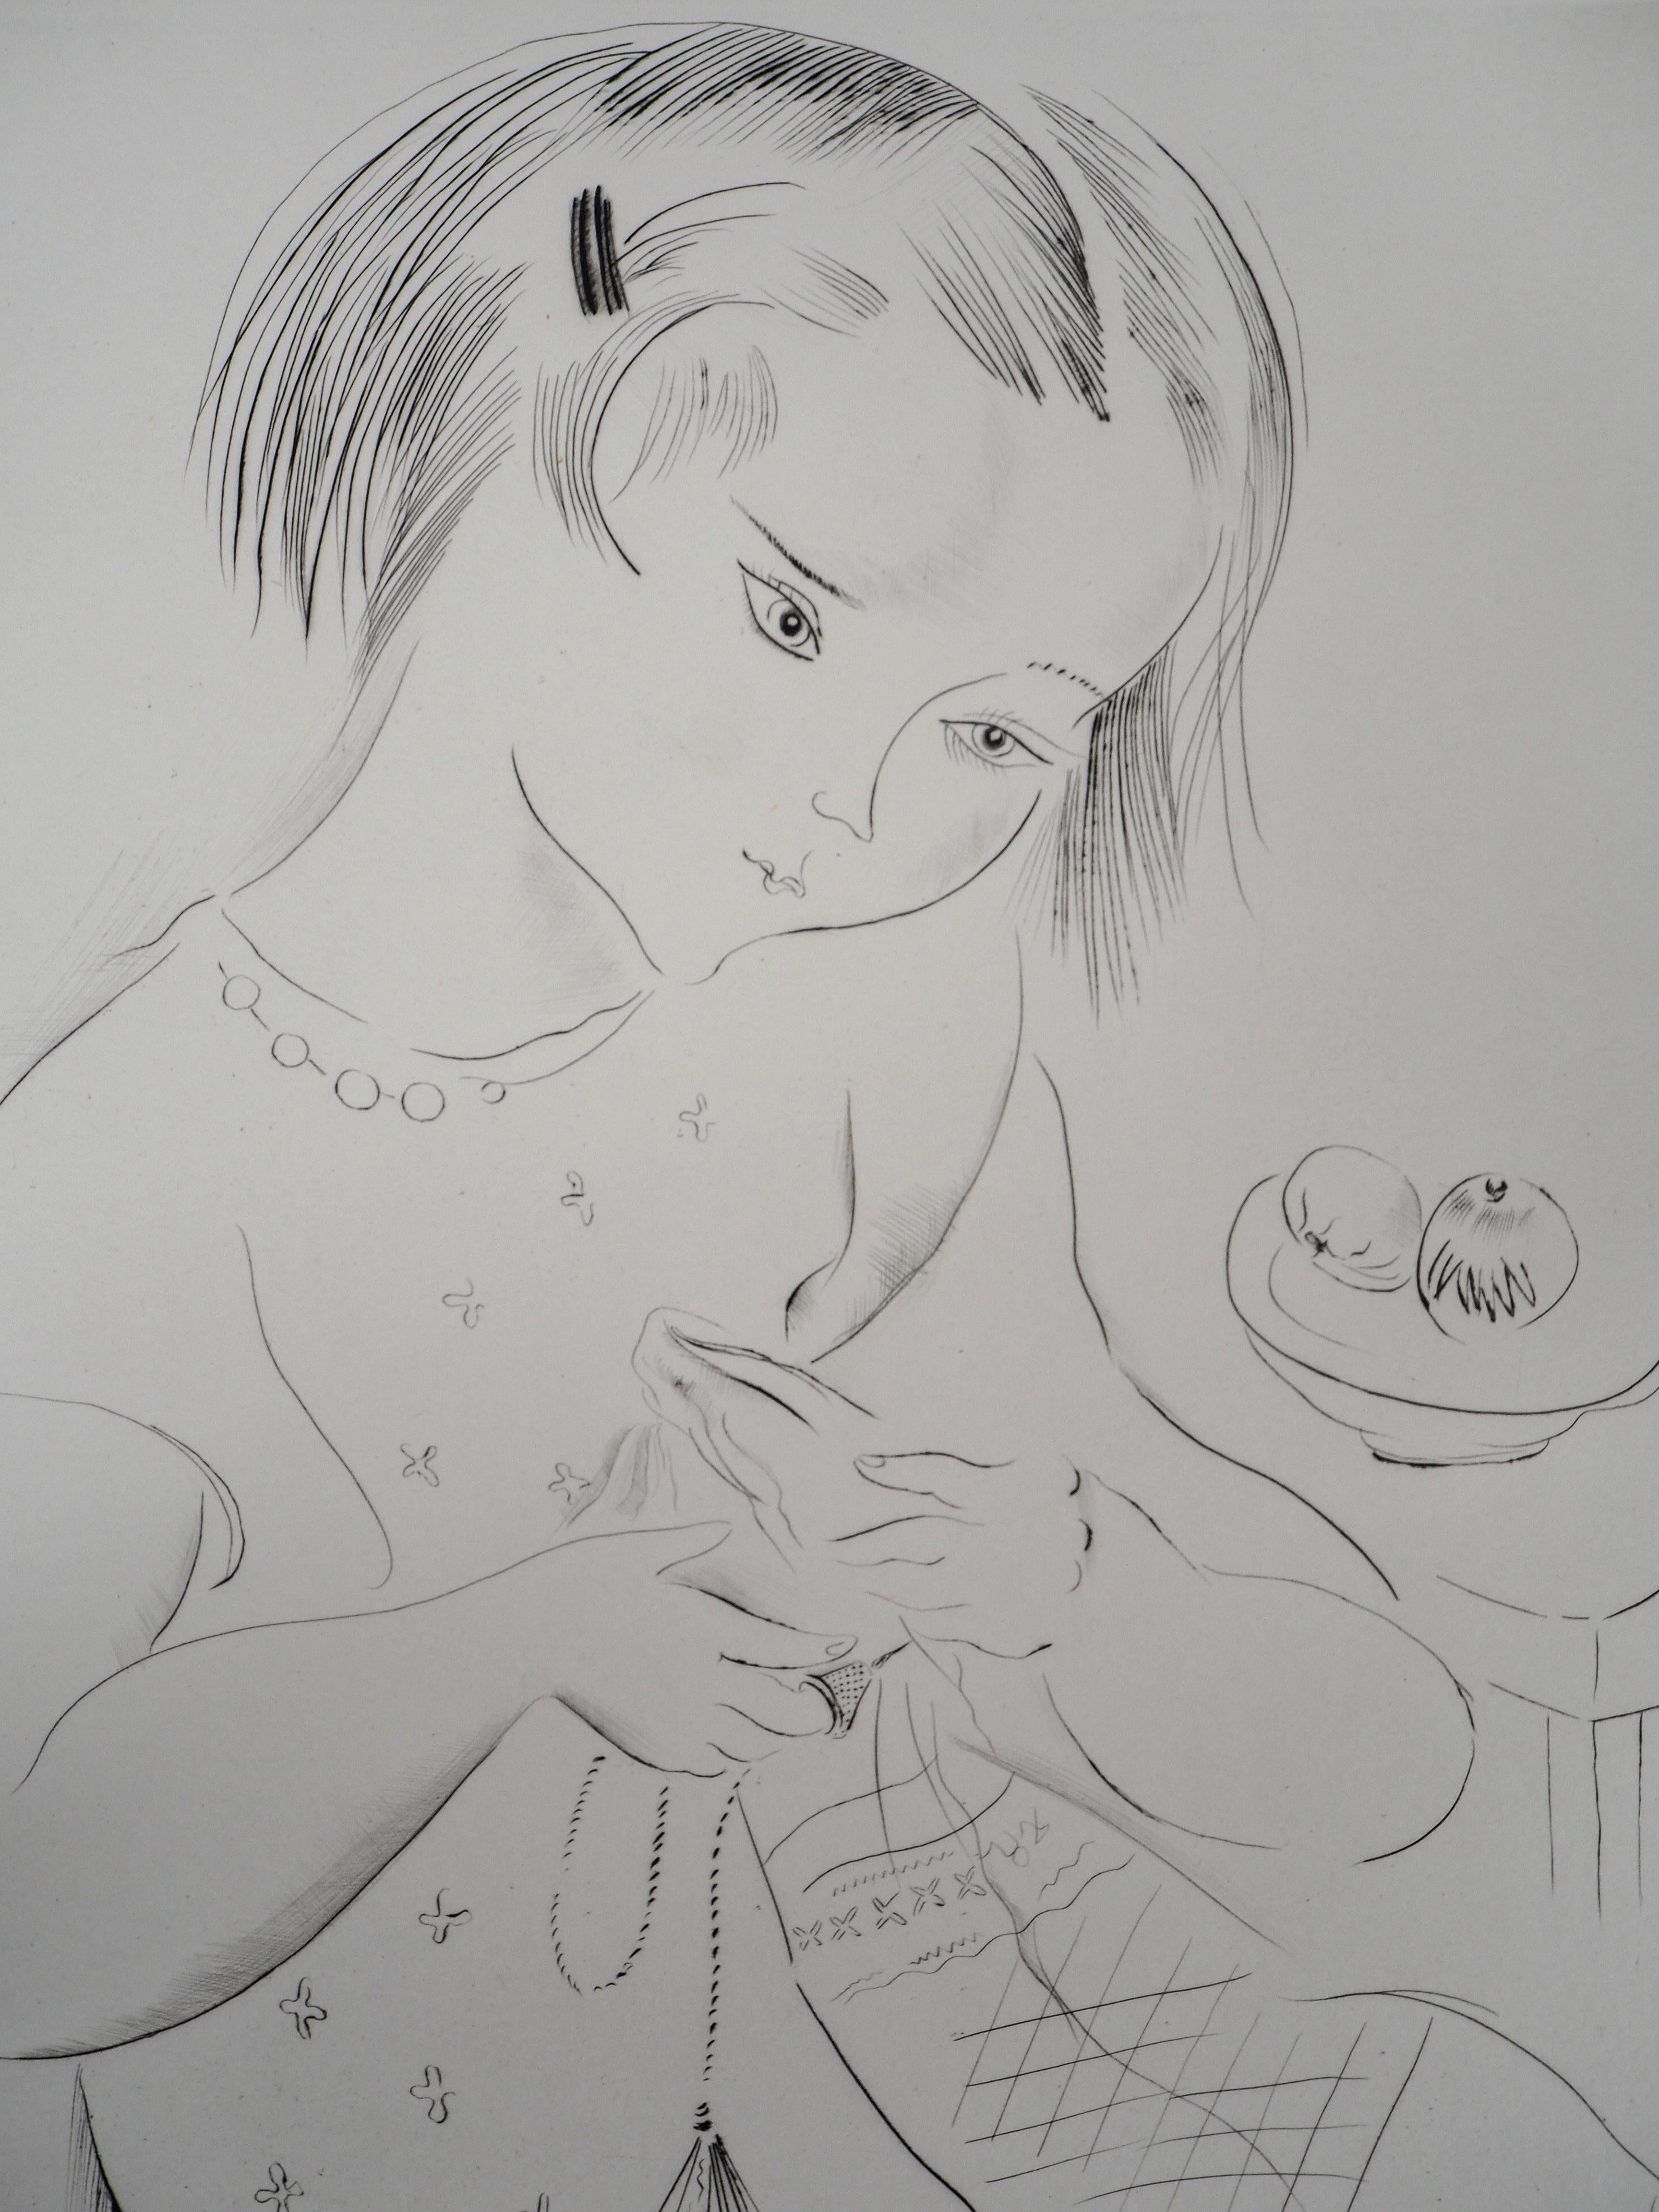 Sewing Girl - Original Handsigned Etching - Realist Print by Mily Possoz